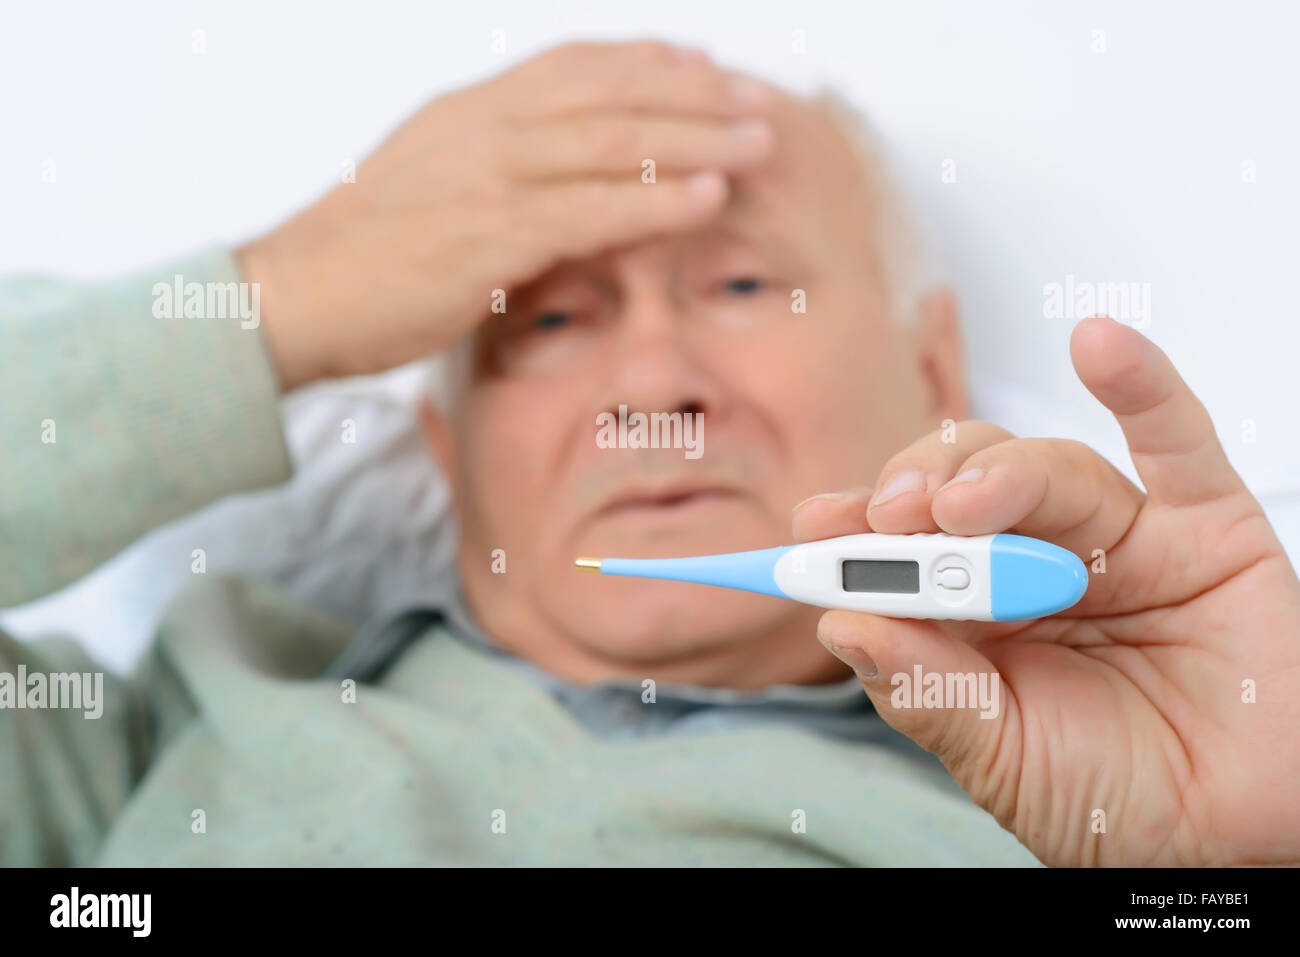 Tired man clutches at his forehead showing the thermometer. Stock Photo